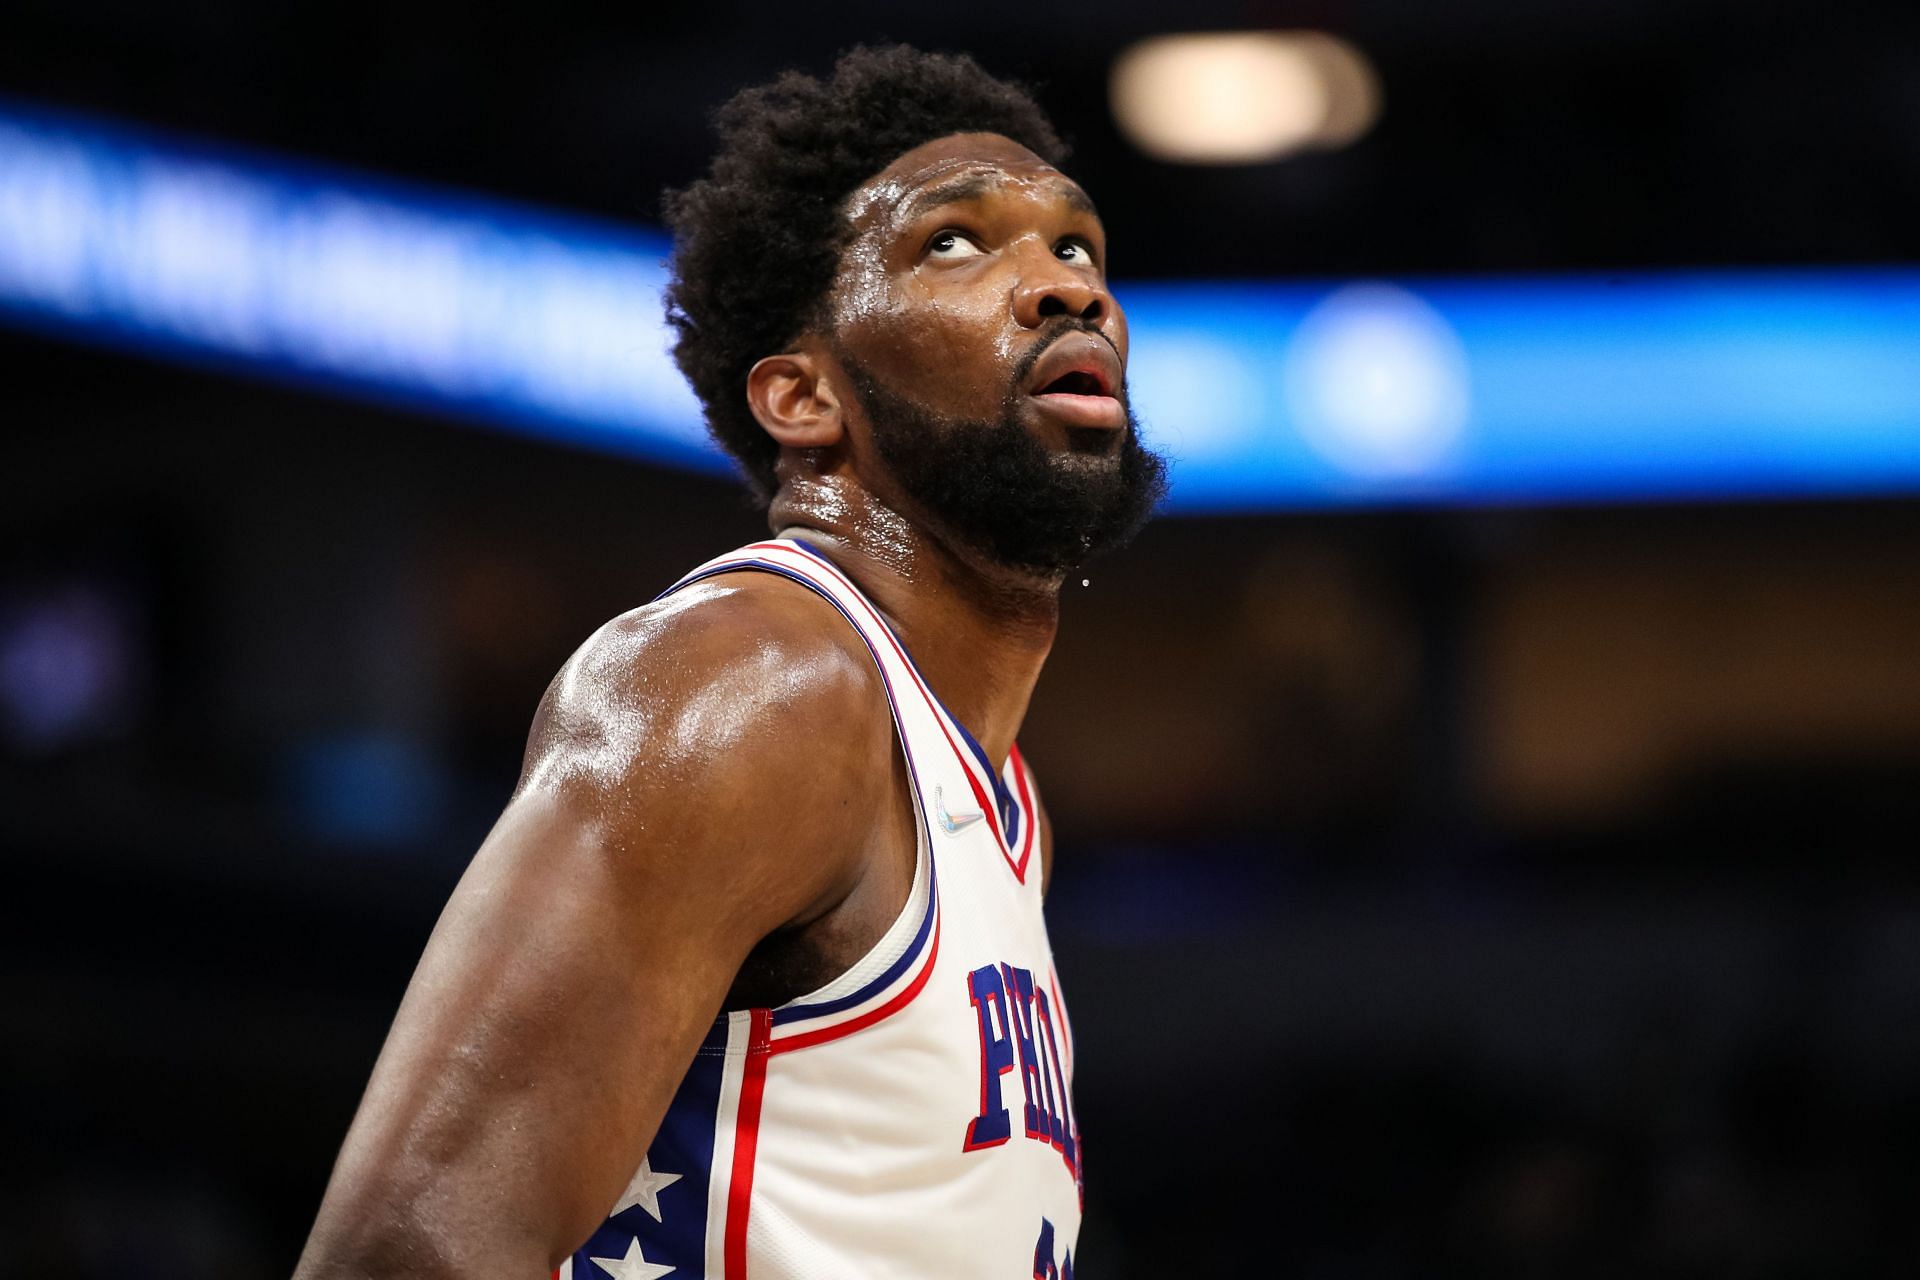 Joel Embiid of the Philadelphia 76ers during a game.